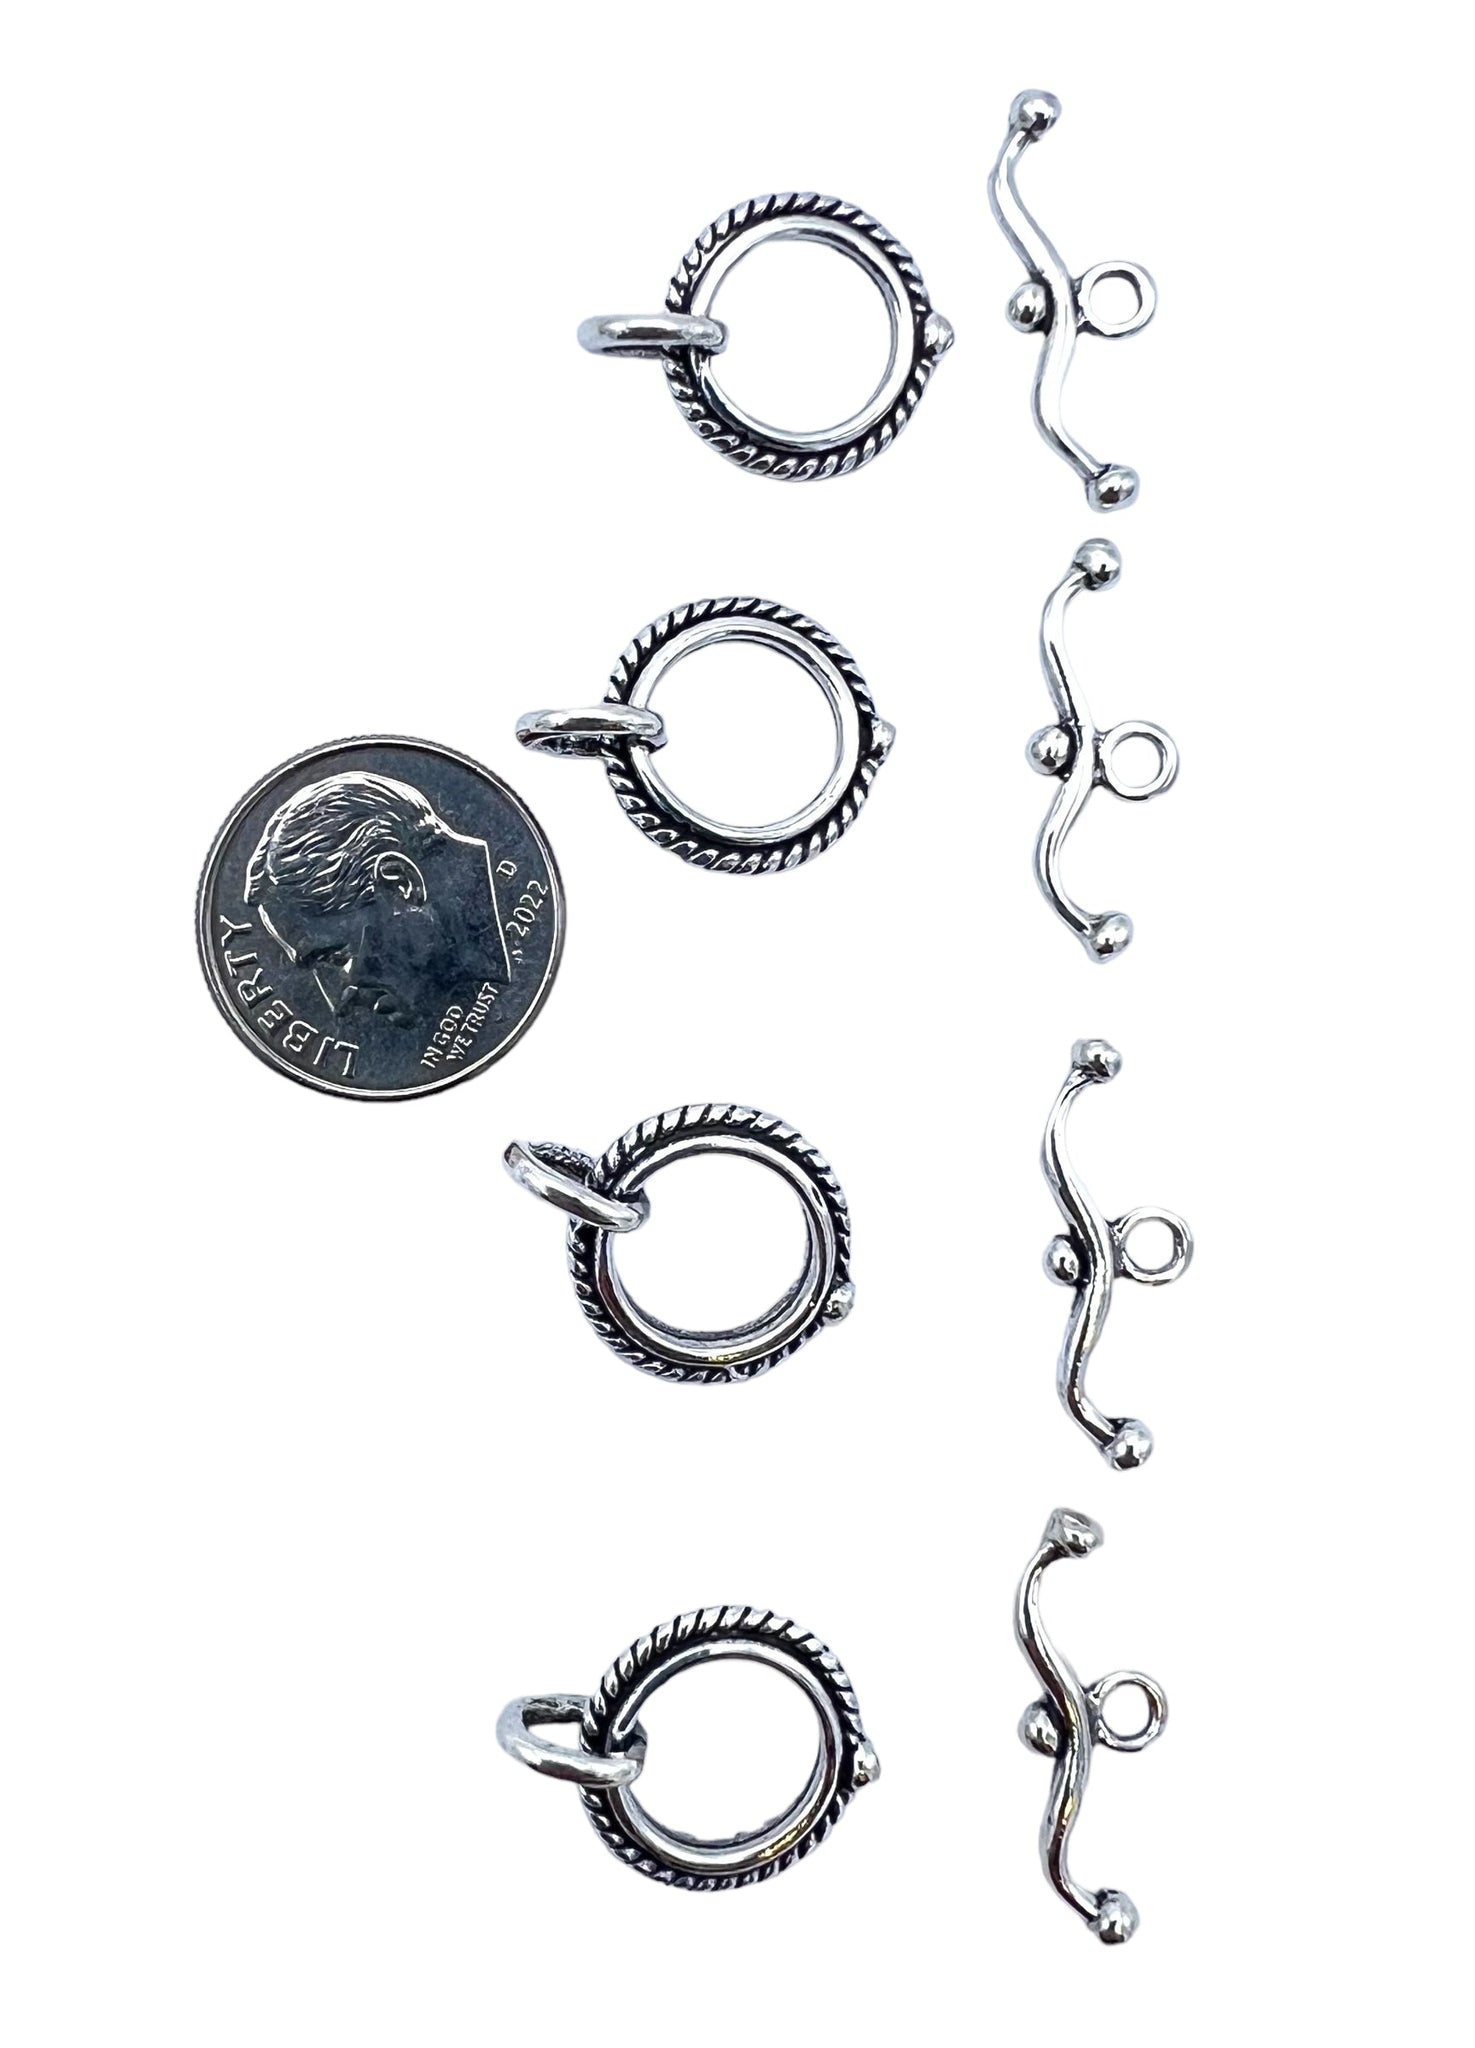 Oxidized Sterling Silver Toggle Clasp (Pkg of 1 Set) -